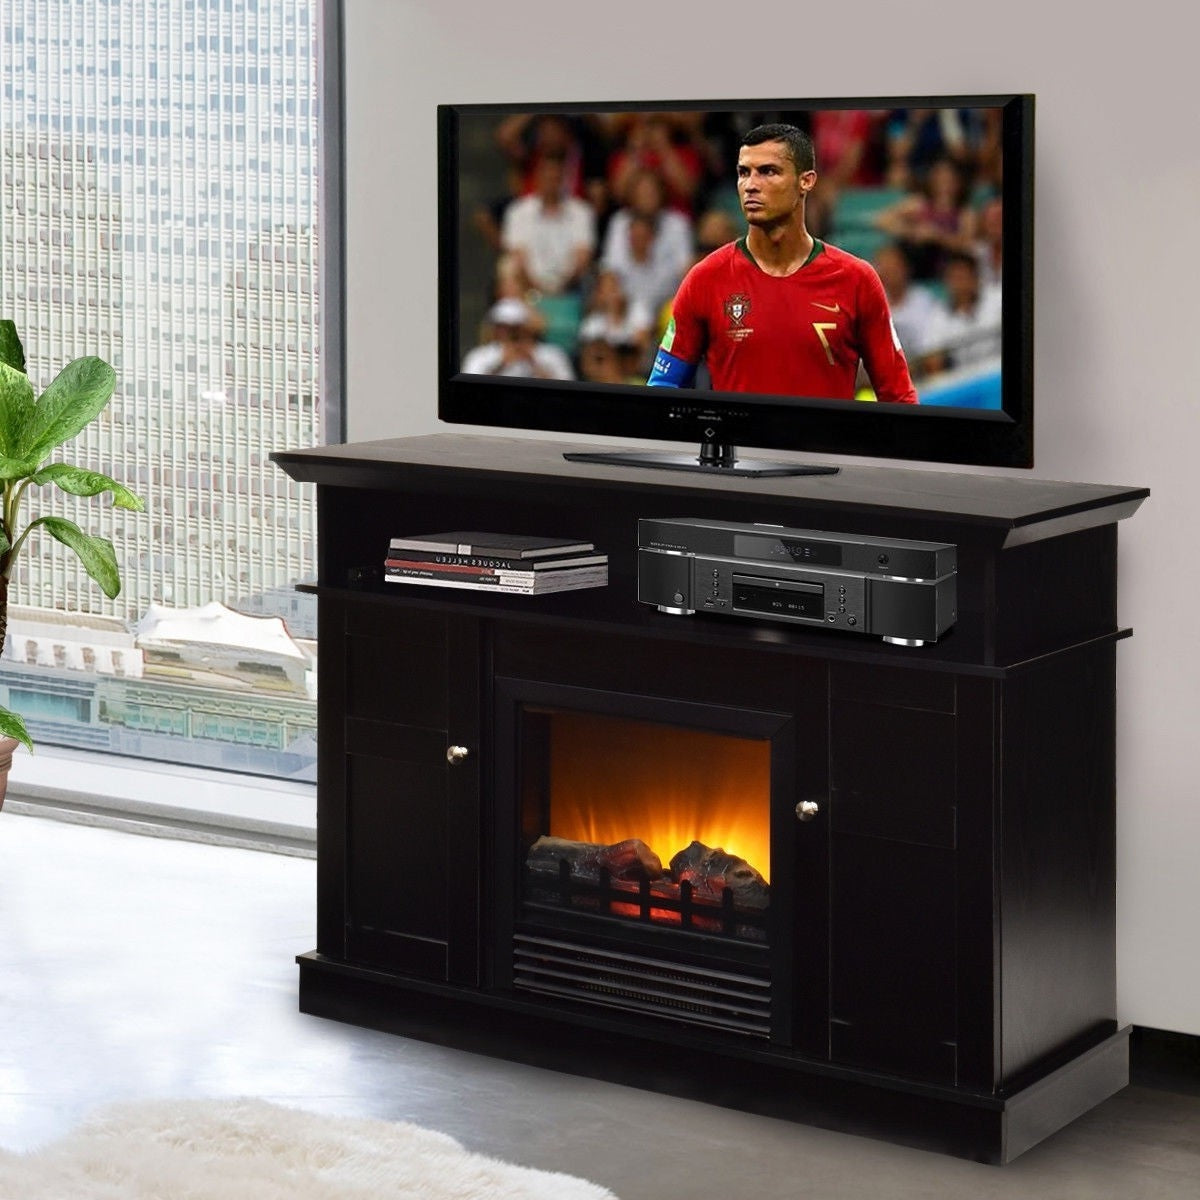 FastFurnishings Black Wood 43-inch TV Stand with Electric ...